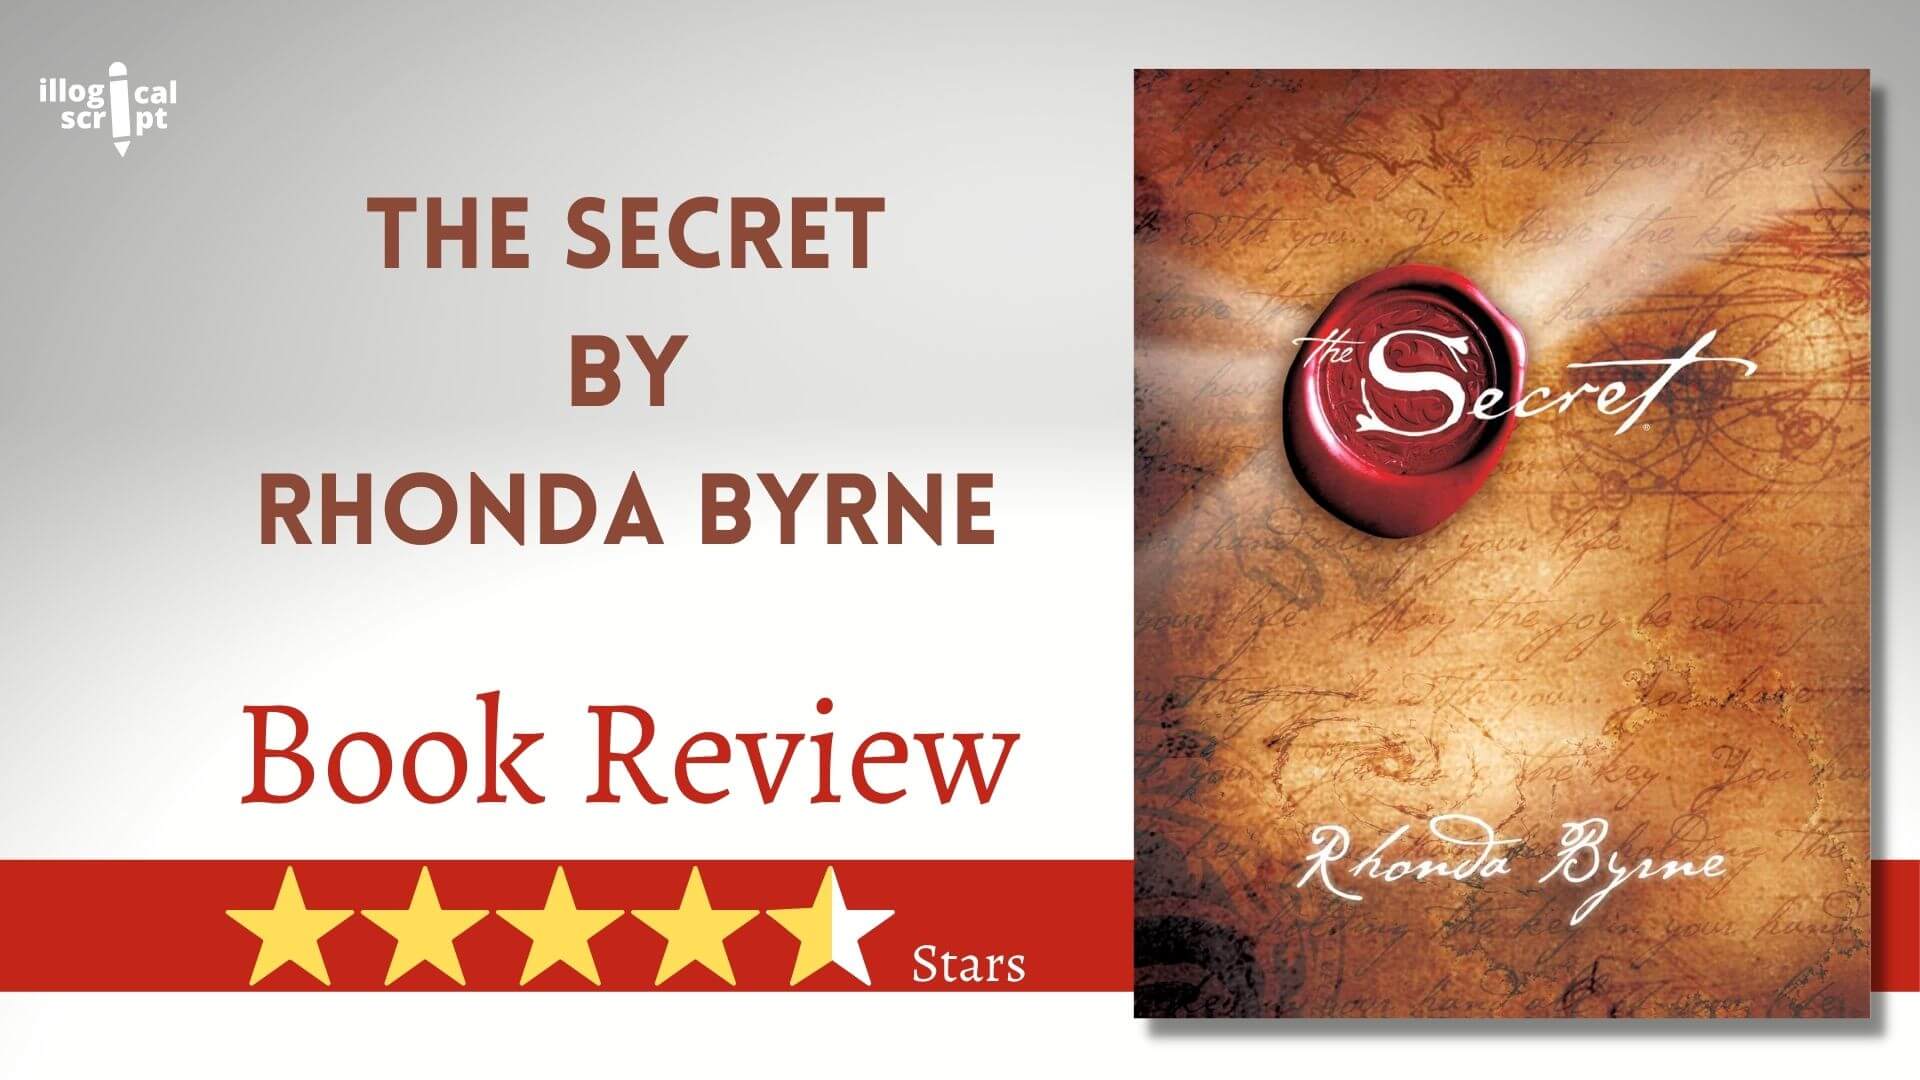 Book Review_ The Secret by Rhonda Byrne, feature image